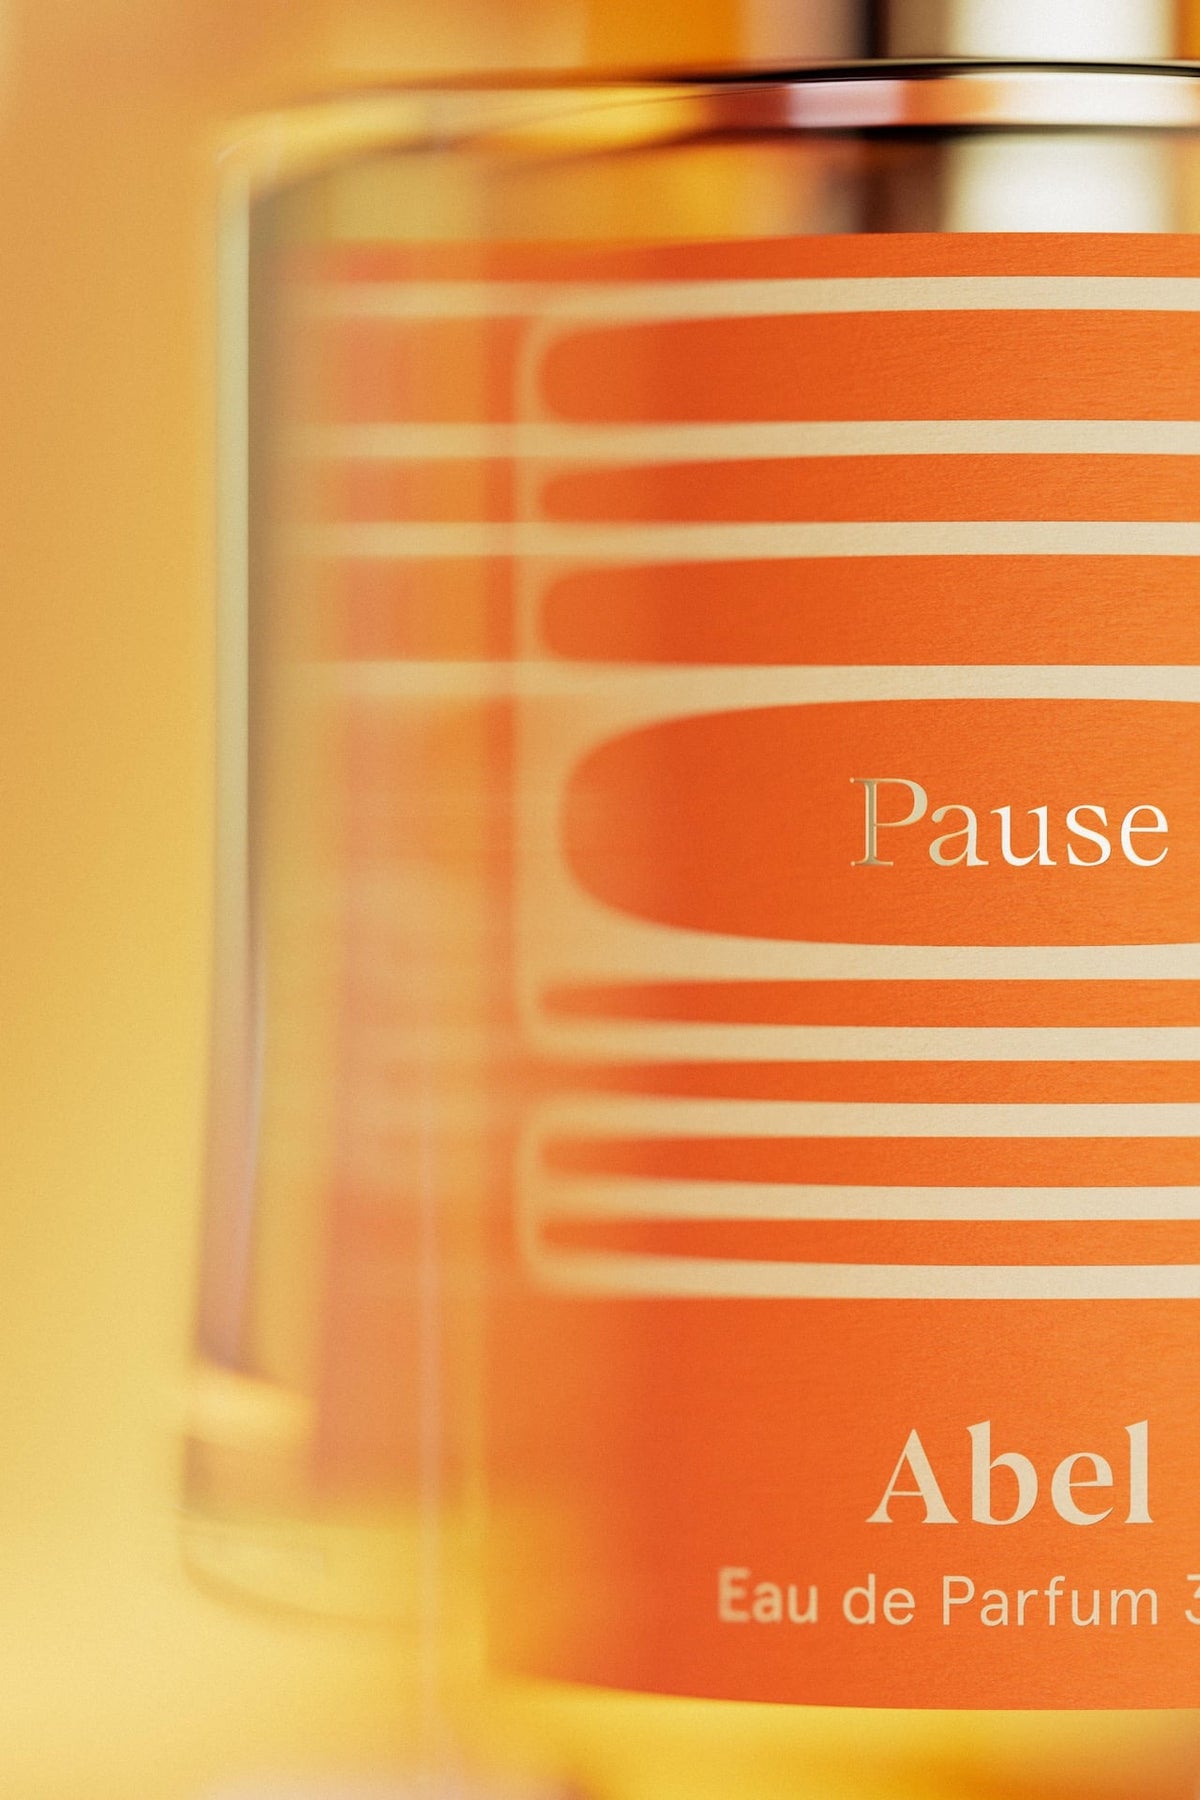 A bottle of Abel perfume with a Pause violet leaf background.